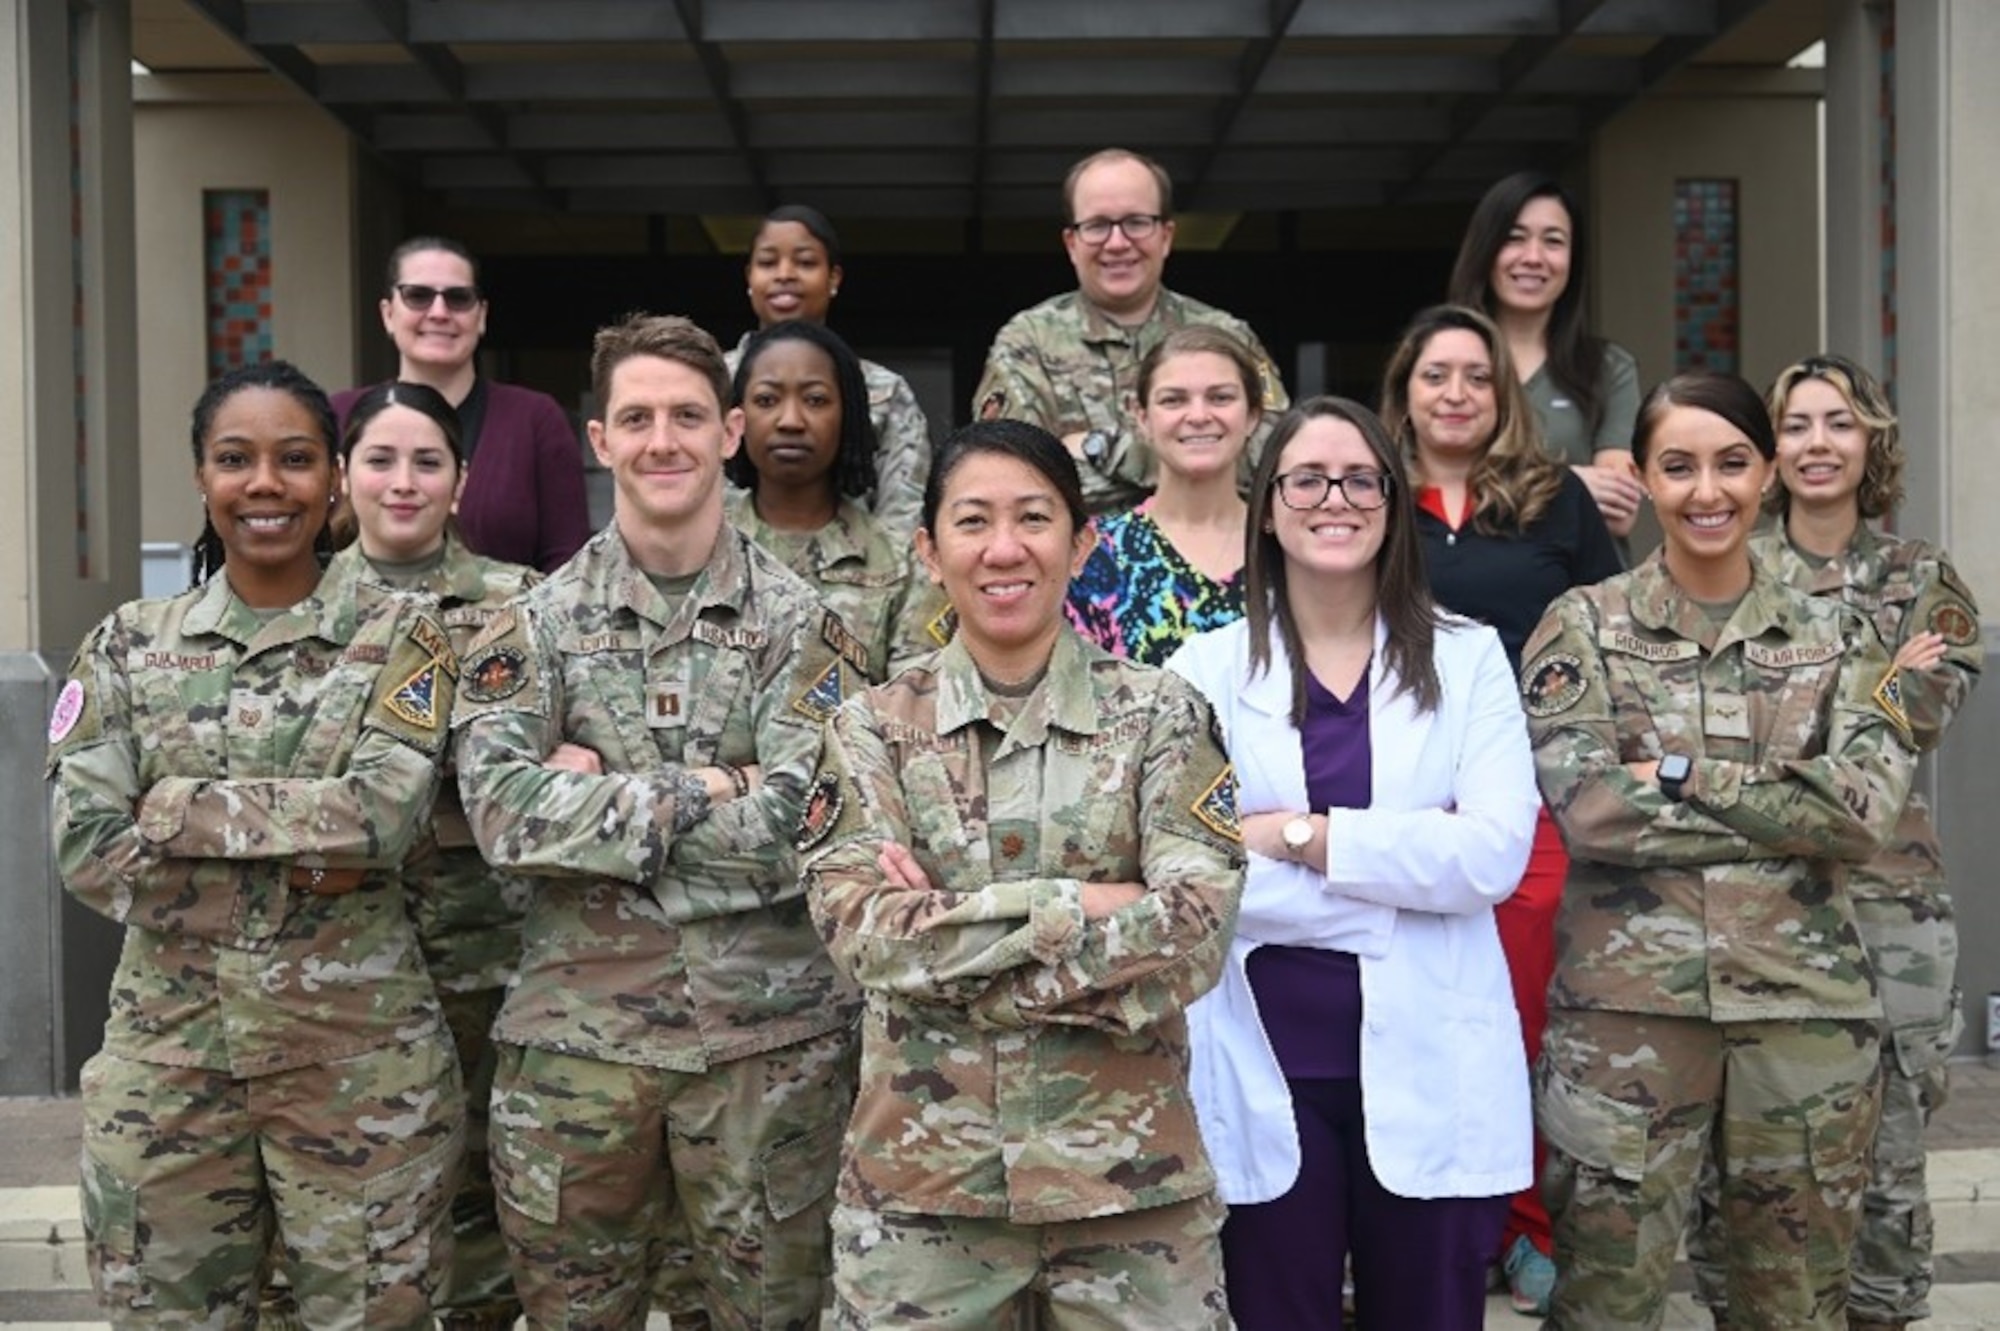 30th medical group personnel from the women's health clinic pose for photo